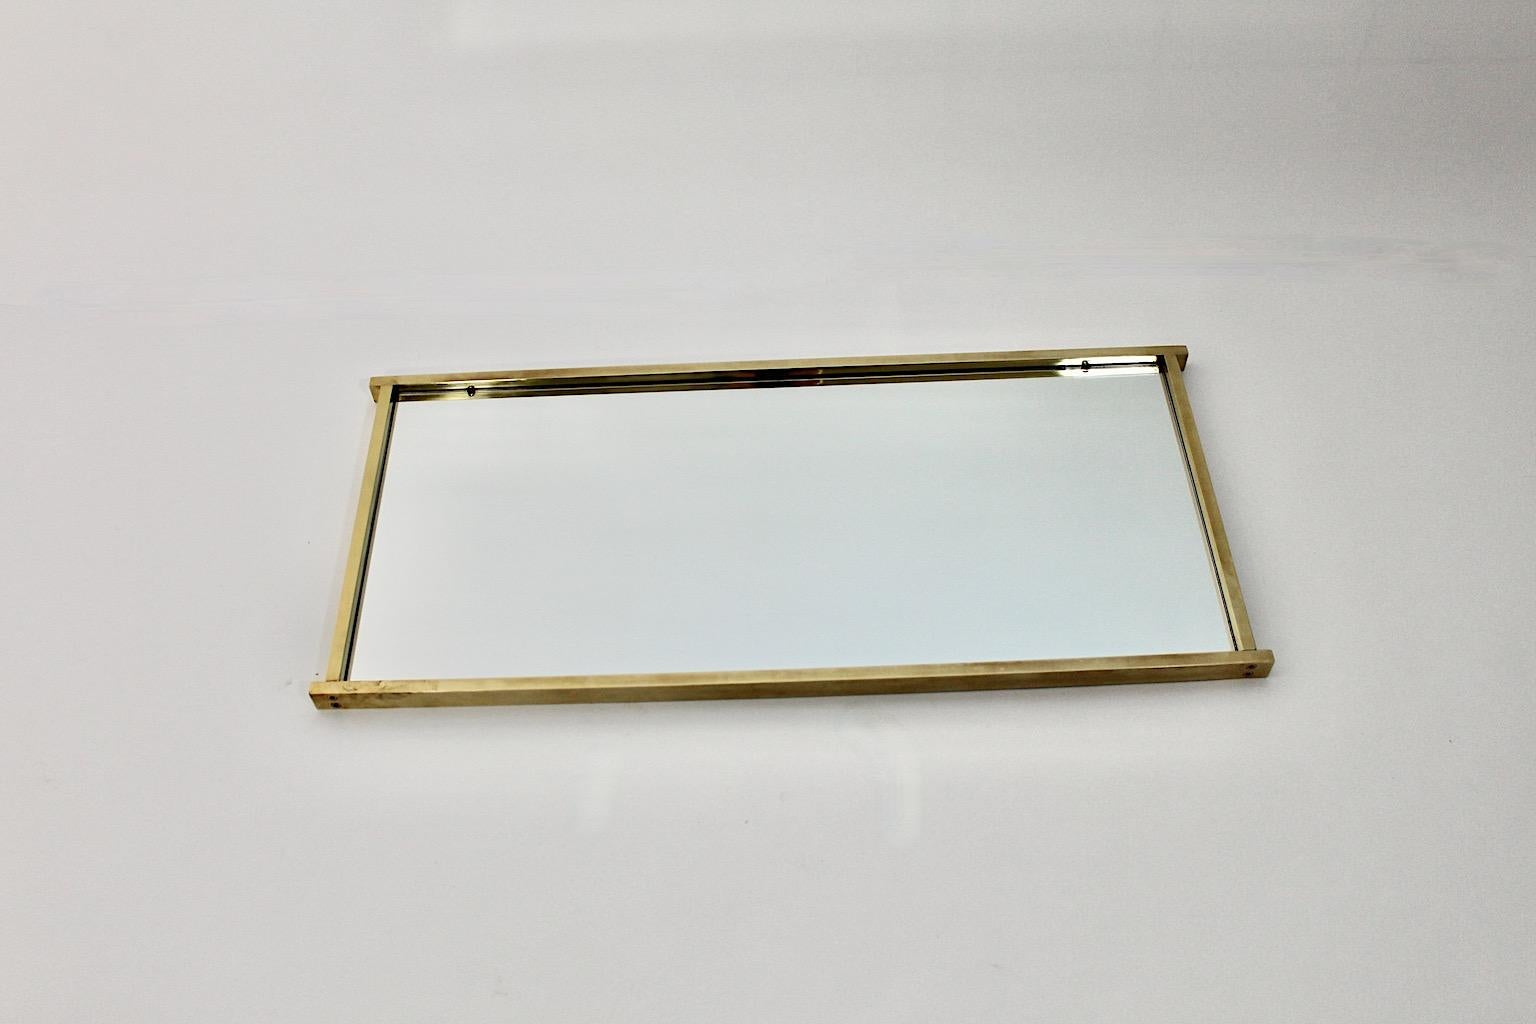 Modernist vintage rectangular like floor mirror or wall mirror from brass Italy 1970s.
An elegant and beautiful floor mirror or wall mirror with angular edges from brass in sleek shape.
This wonderful wall mirror was designed to anchor your interior